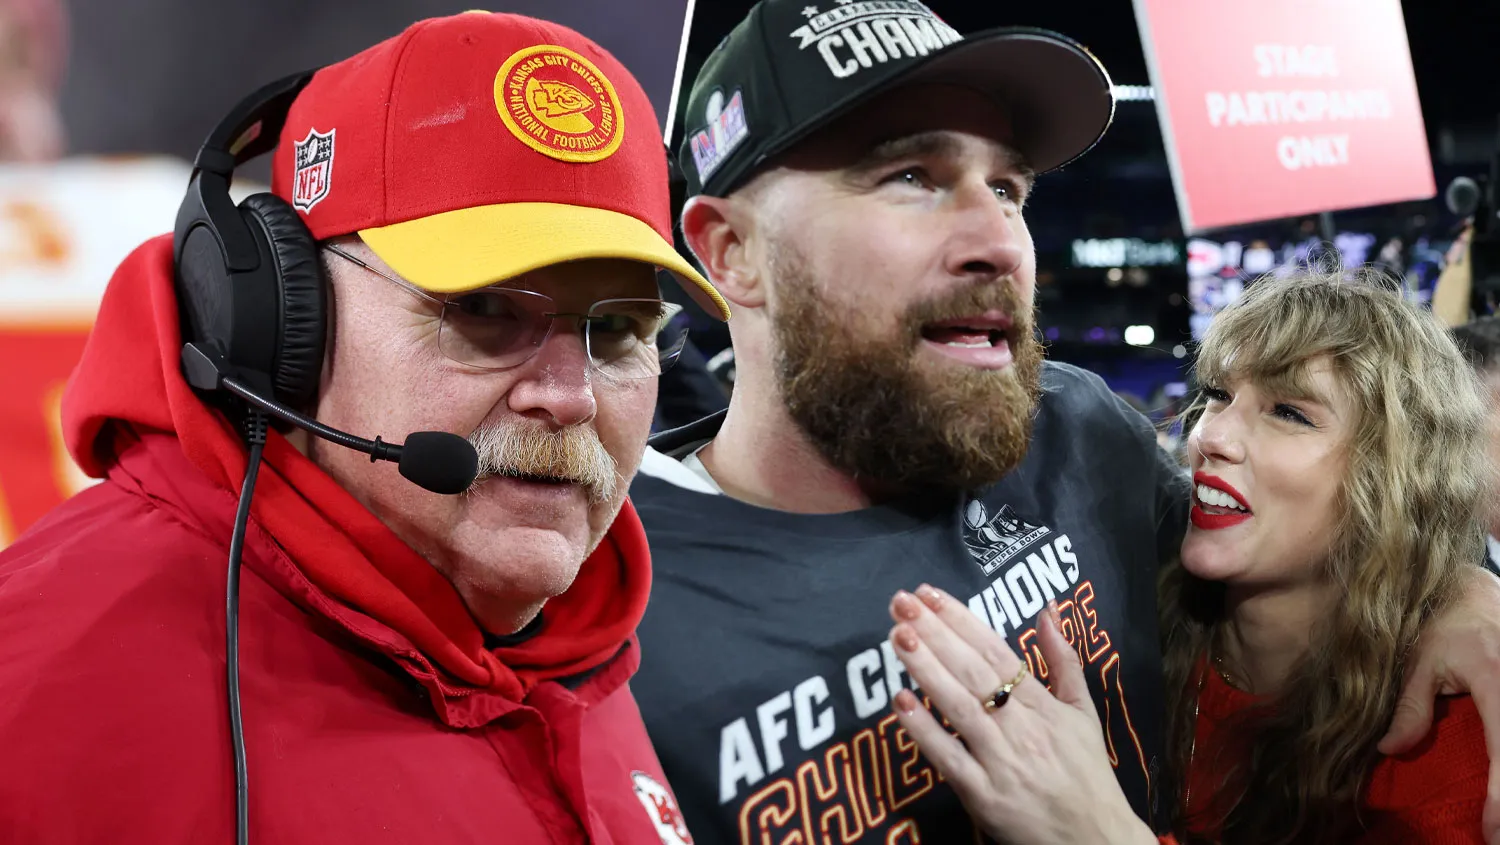 Andy Reid on Travis Kelce and Taylor Swift: “Listen, she’s a good girl and I’m happy for Trav, and there has been no distraction that way at all. Trav’s handled it right, she’s handled it right, and we just move forward, so it hasn’t been a problem at all”